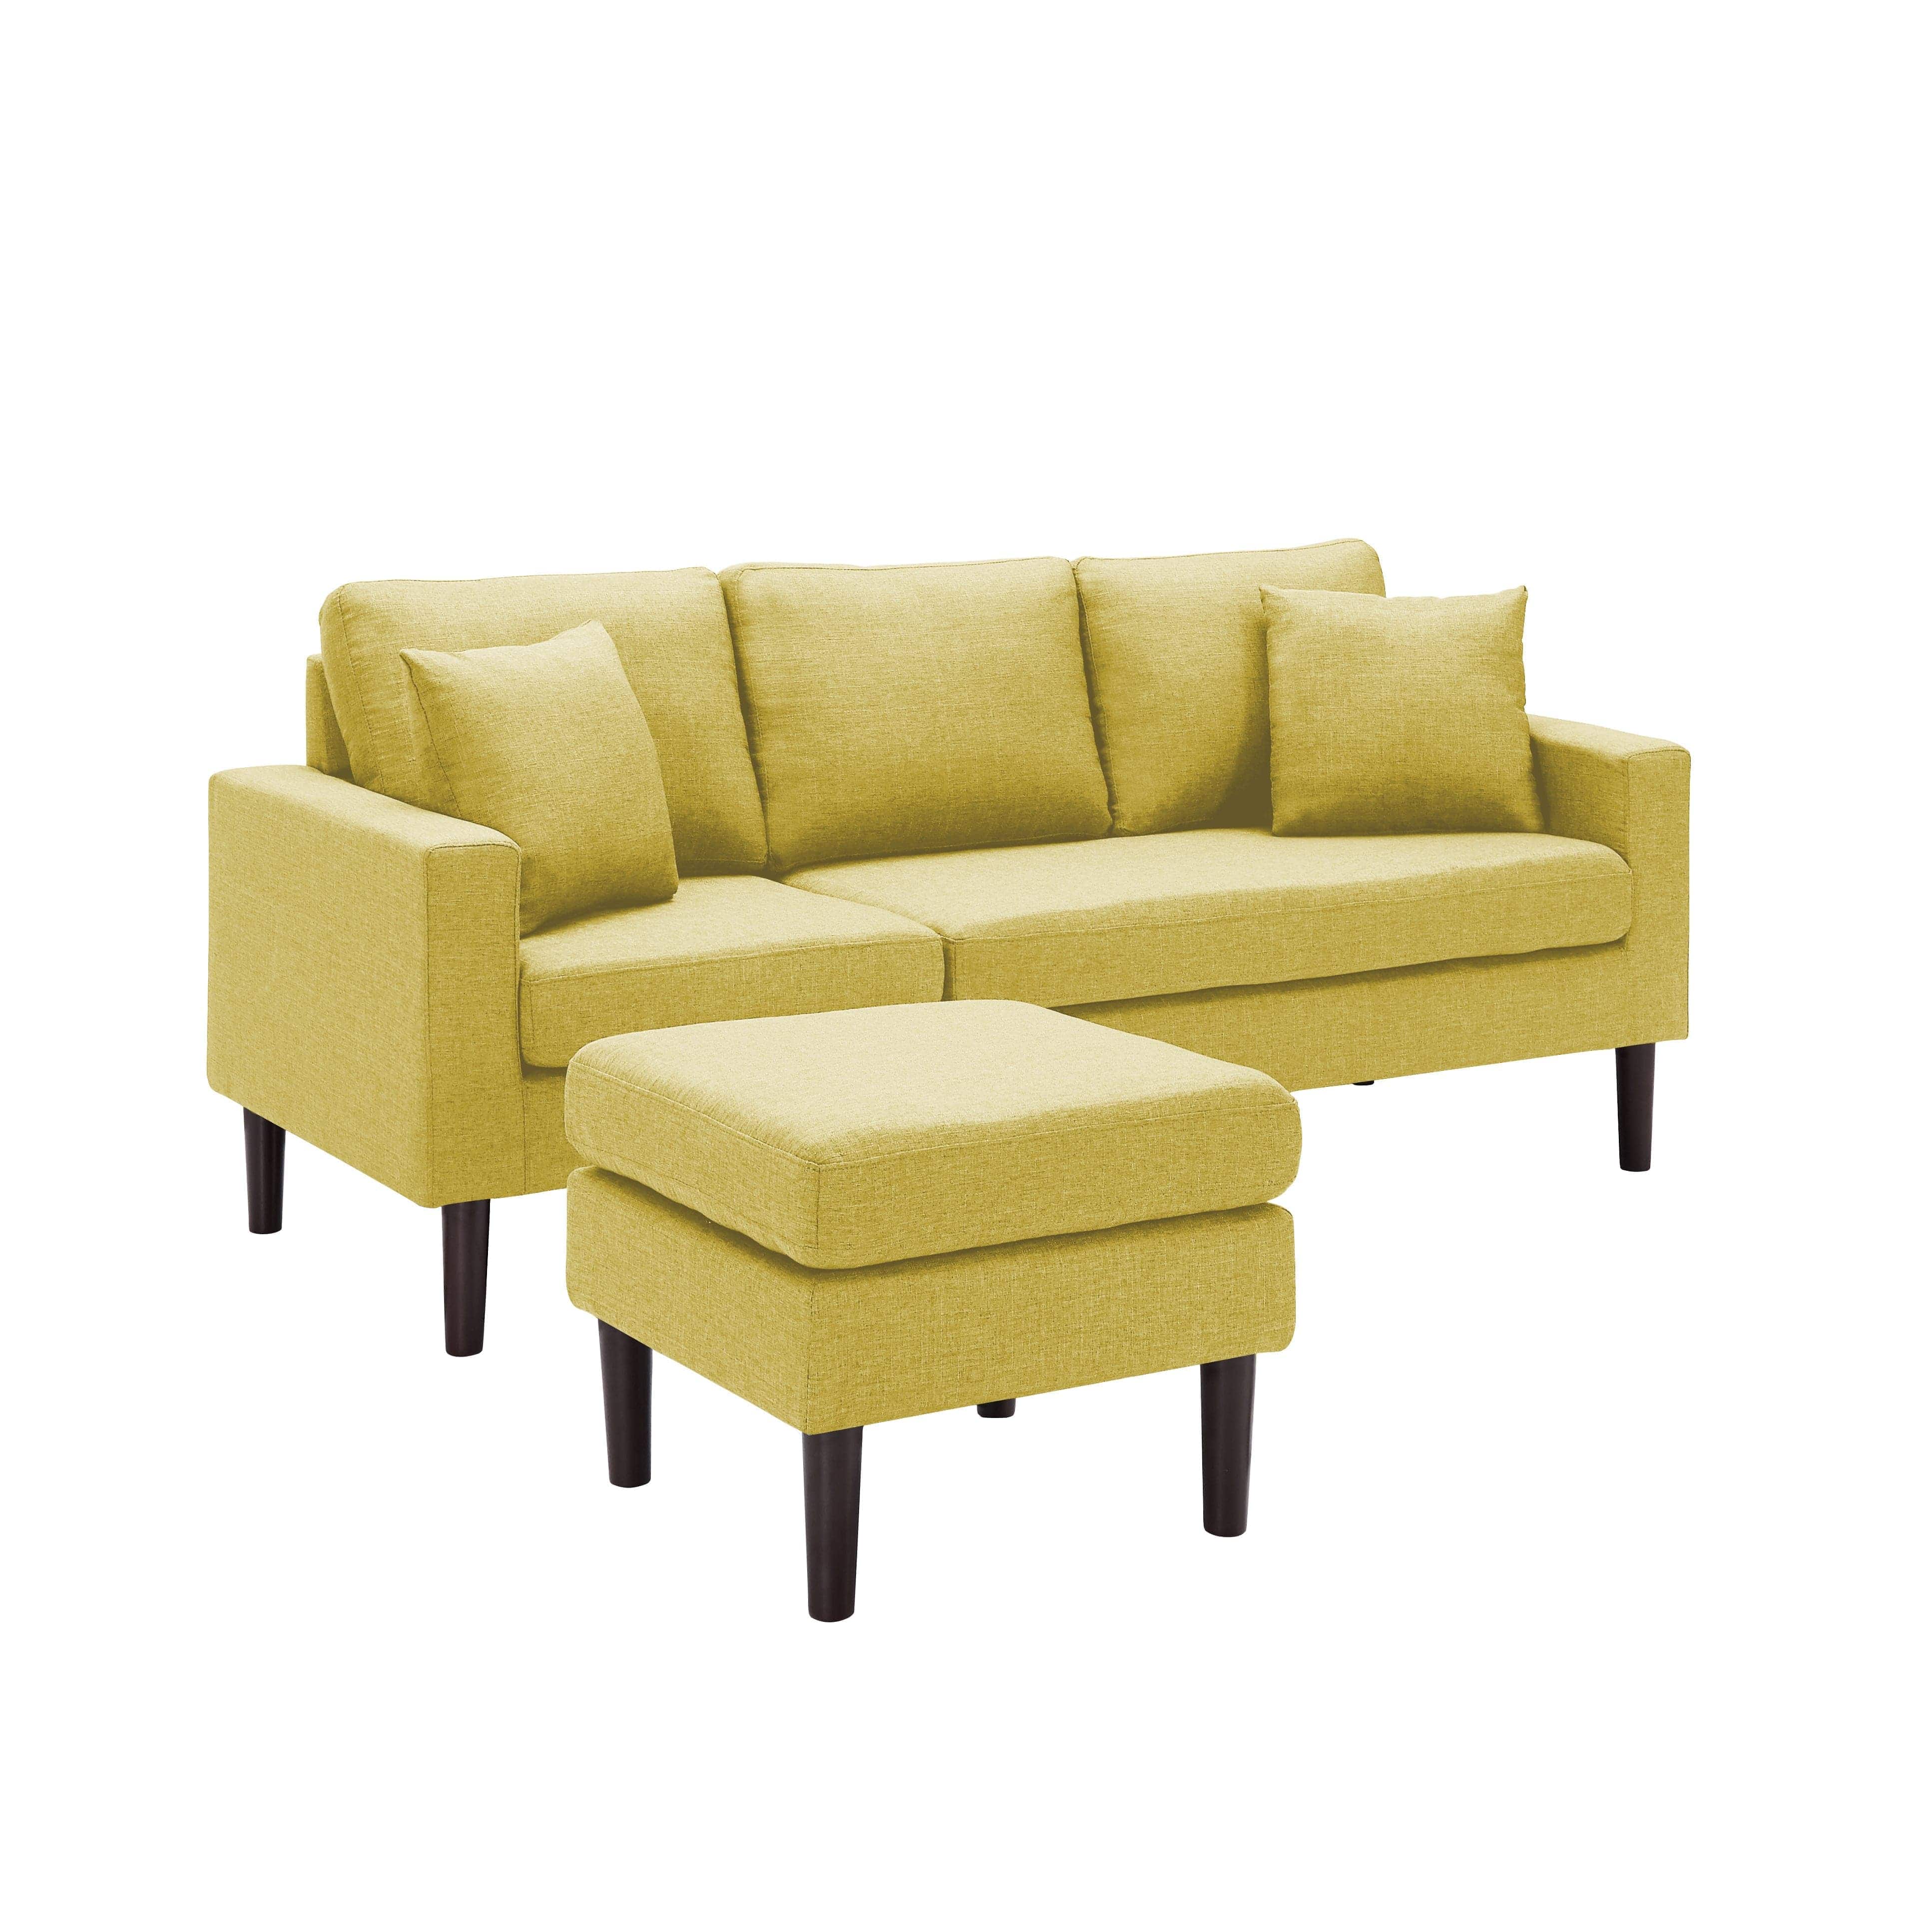 - TFC&H Co. 72" SECTIONAL SOFA LEFT HAND FACING w/ 2 PILLOWS- Ships from The US - sectional at TFC&H Co.